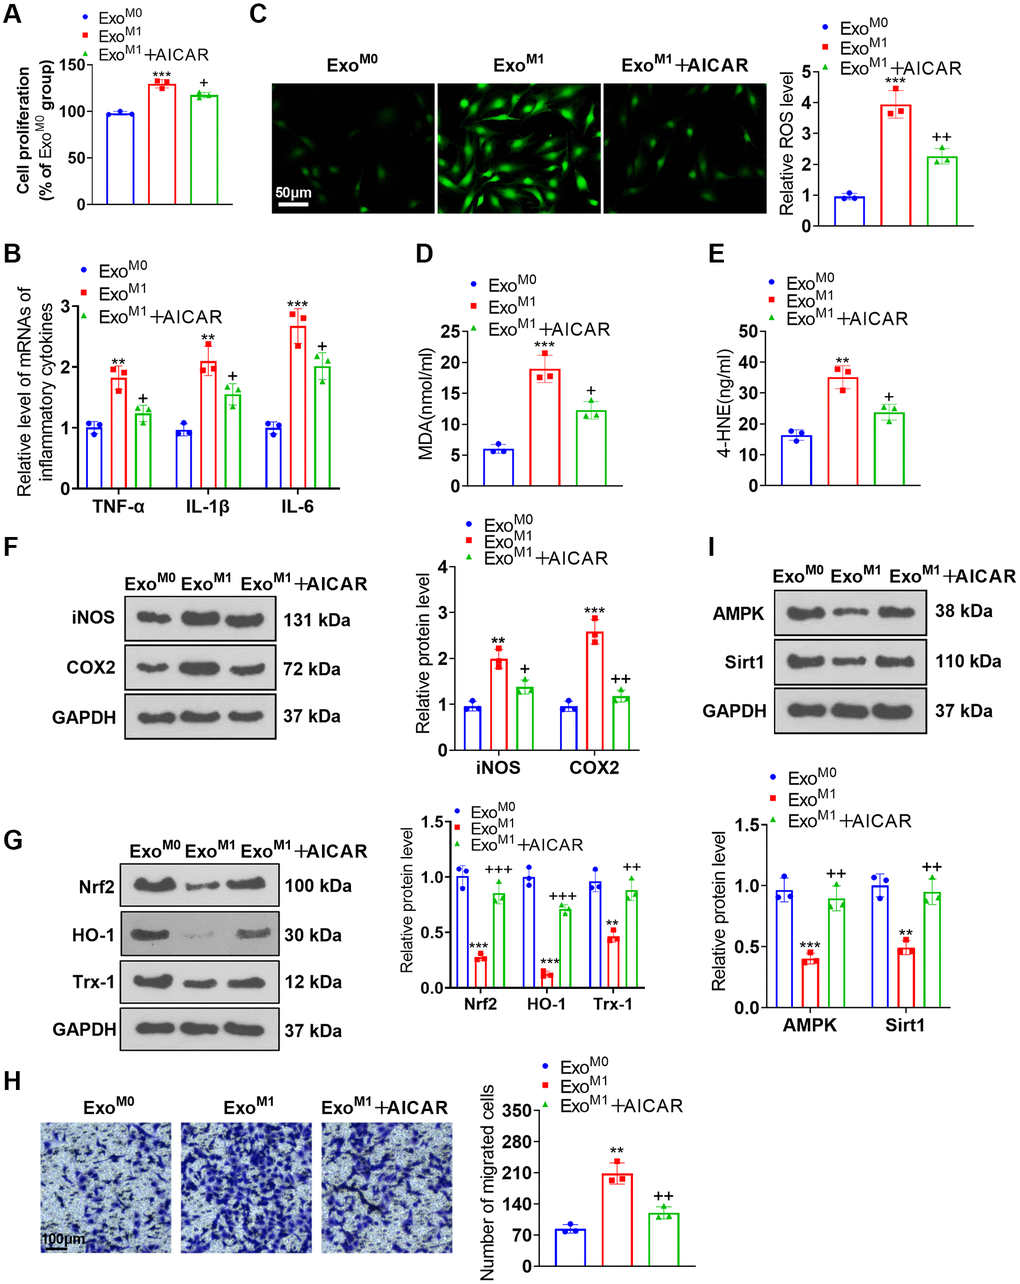 AMPK activation ameliorated the impacts of M1 macrophage exosomes on PASMCs. PASMCs were cultured together with M0 and M1 macrophage exosomes, with AICAR applied to the conditioned medium. (A) CCK8 assay was conducted for examining PASMC proliferation. (B) RT-PCR was taken for gauging TNF-α, IL-1β, and IL-6 expressions in PASMCs. (C–E) Cell immunofluorescence and colorimetry confirmed the levels of ROS, MDA, and 4-HNE in PASMCs. (F, G) Western blot was done for measuring iNOS, COX2, Nrf2, HO-1 and Trx-1 expressions in PASMCs. (H) Transwell examined PASMC migration. (I) Western blot verified the level of the AMPK/Sirt1 pathway in PASMCs. N = 3. **P ***P M0); +P ++P +++P M1).